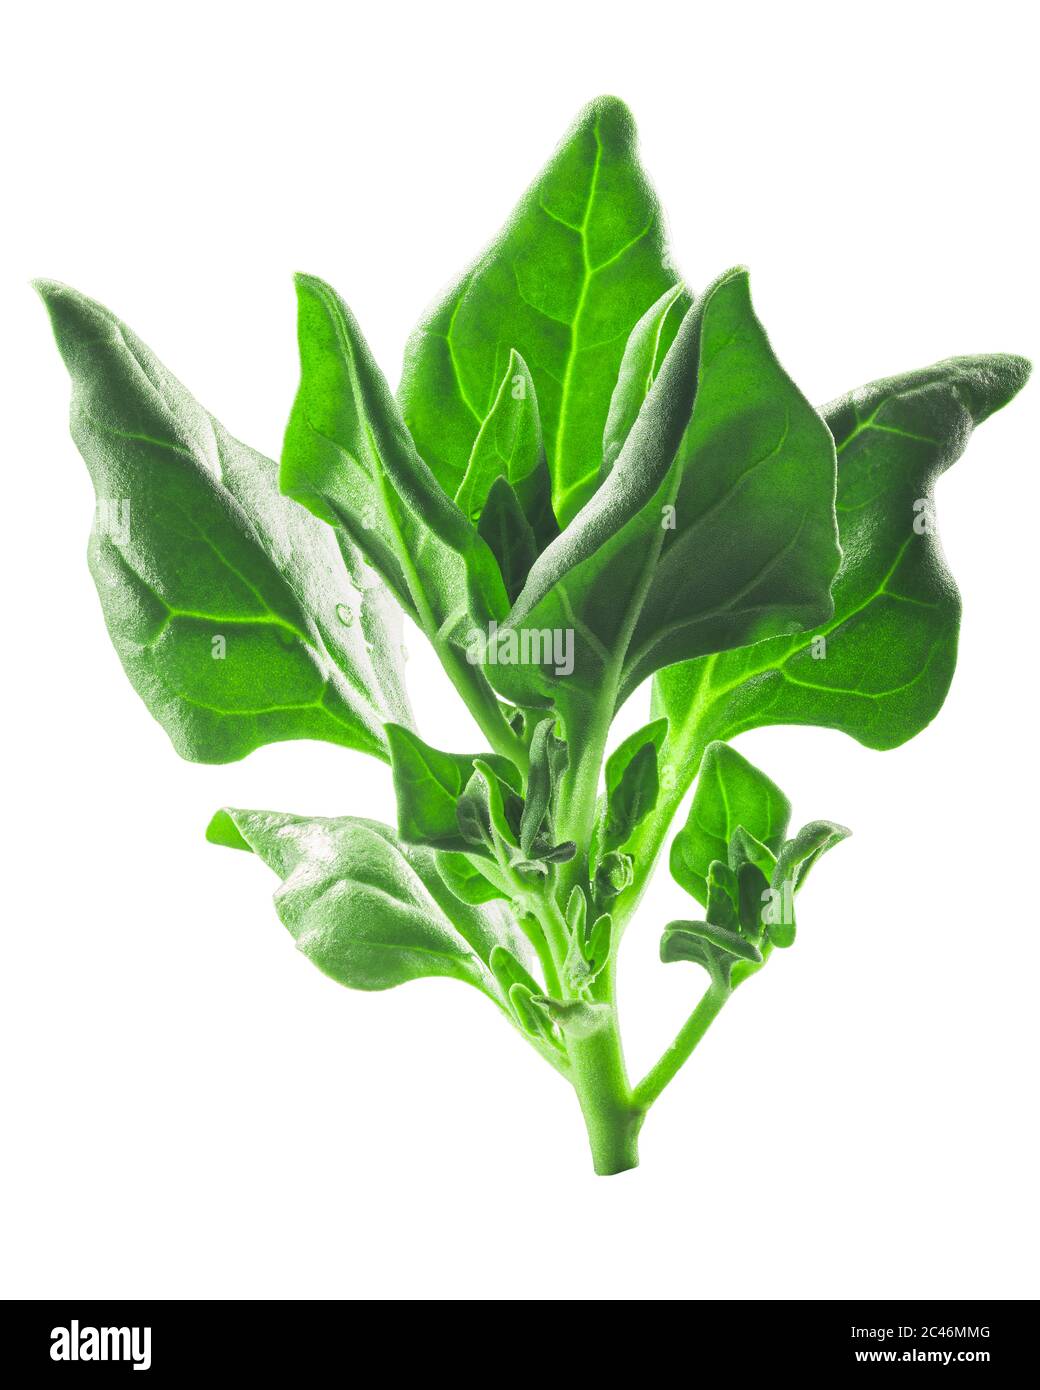 New Zealand spinach (Tetragonia tetragonoides) isolated w clipping paths Stock Photo